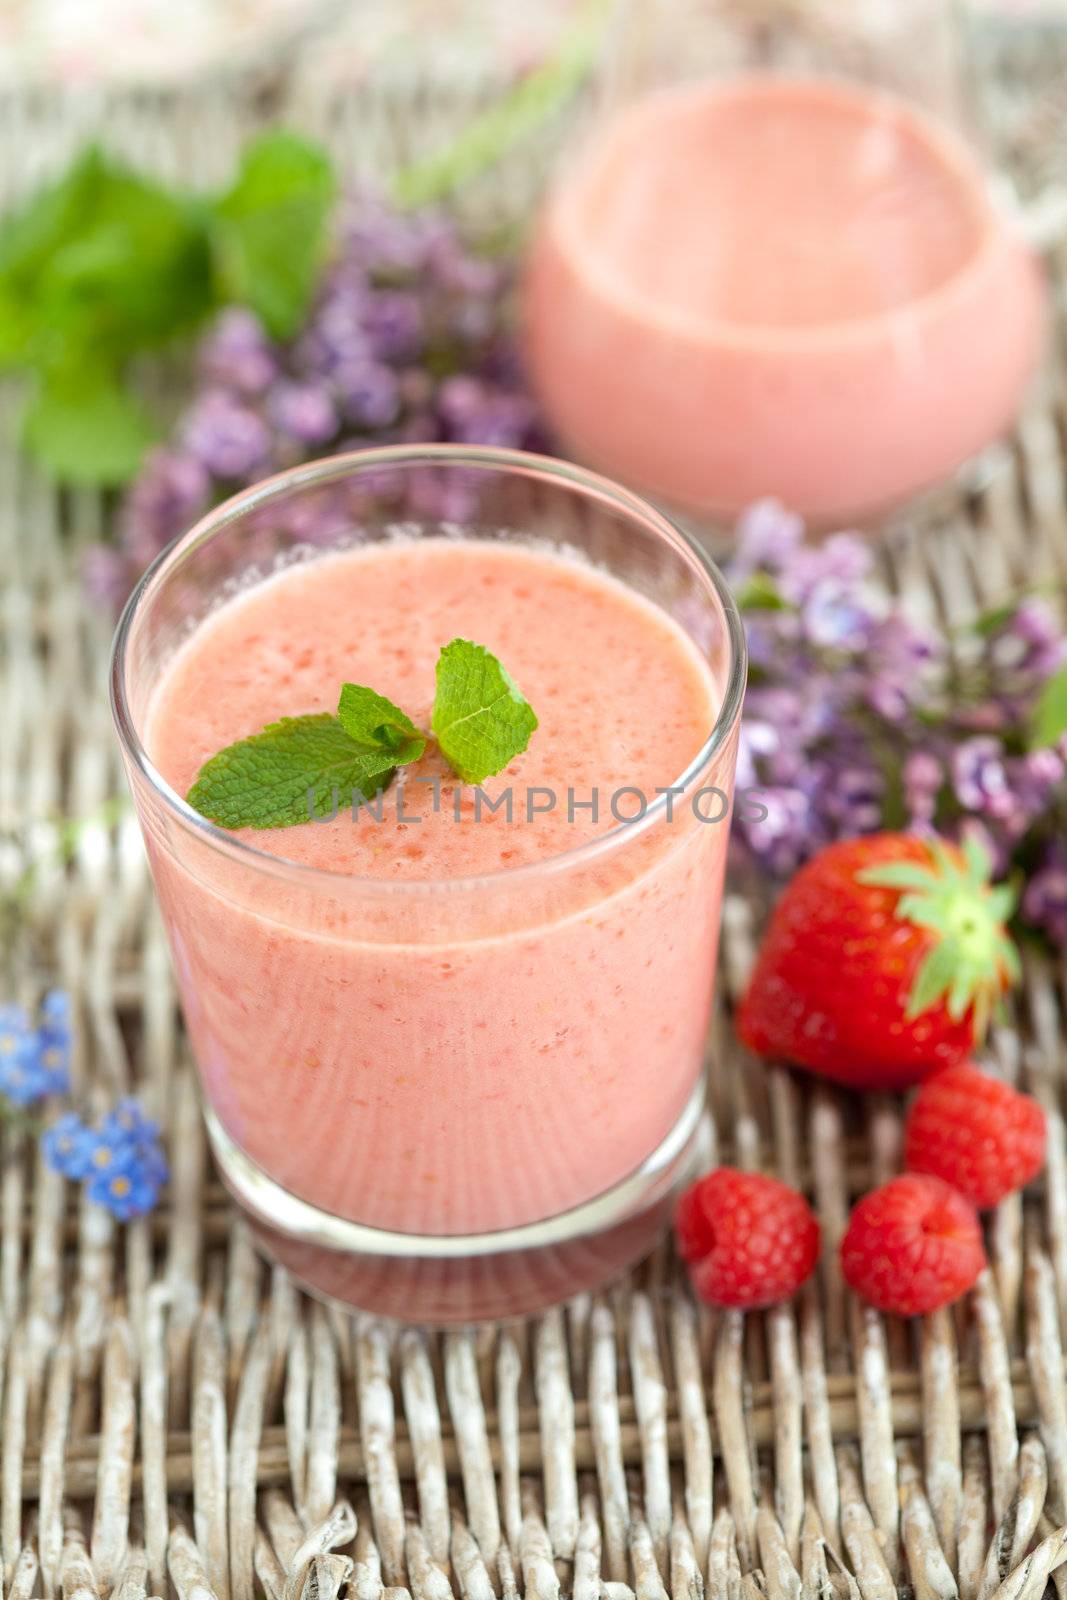 Delicious drink with strawberries and raspberries topped with mint